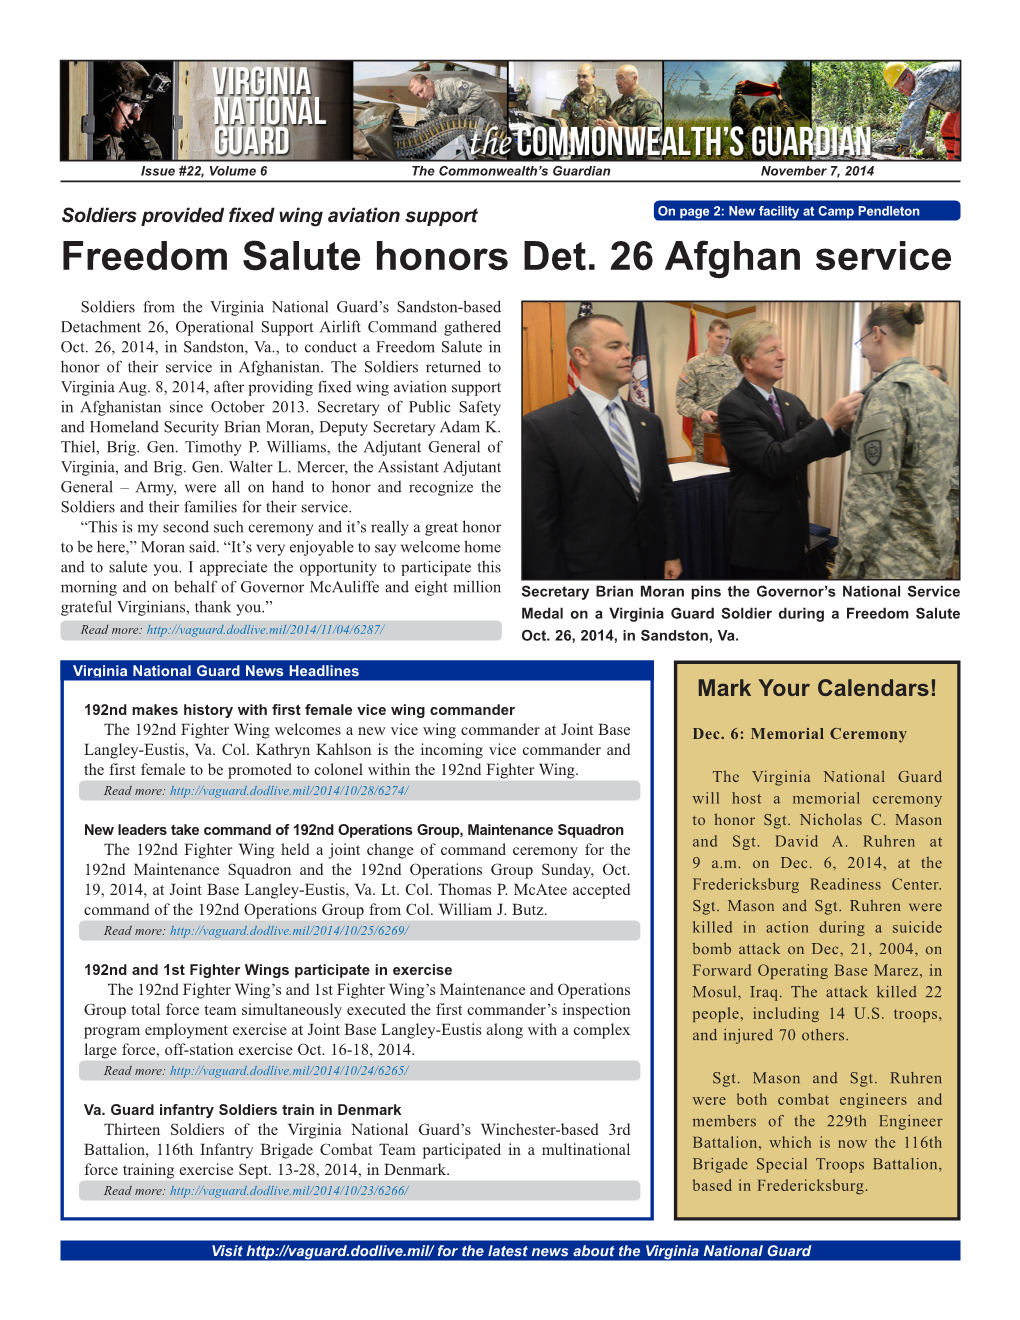 Freedom Salute Honors Det. 26 Afghan Service